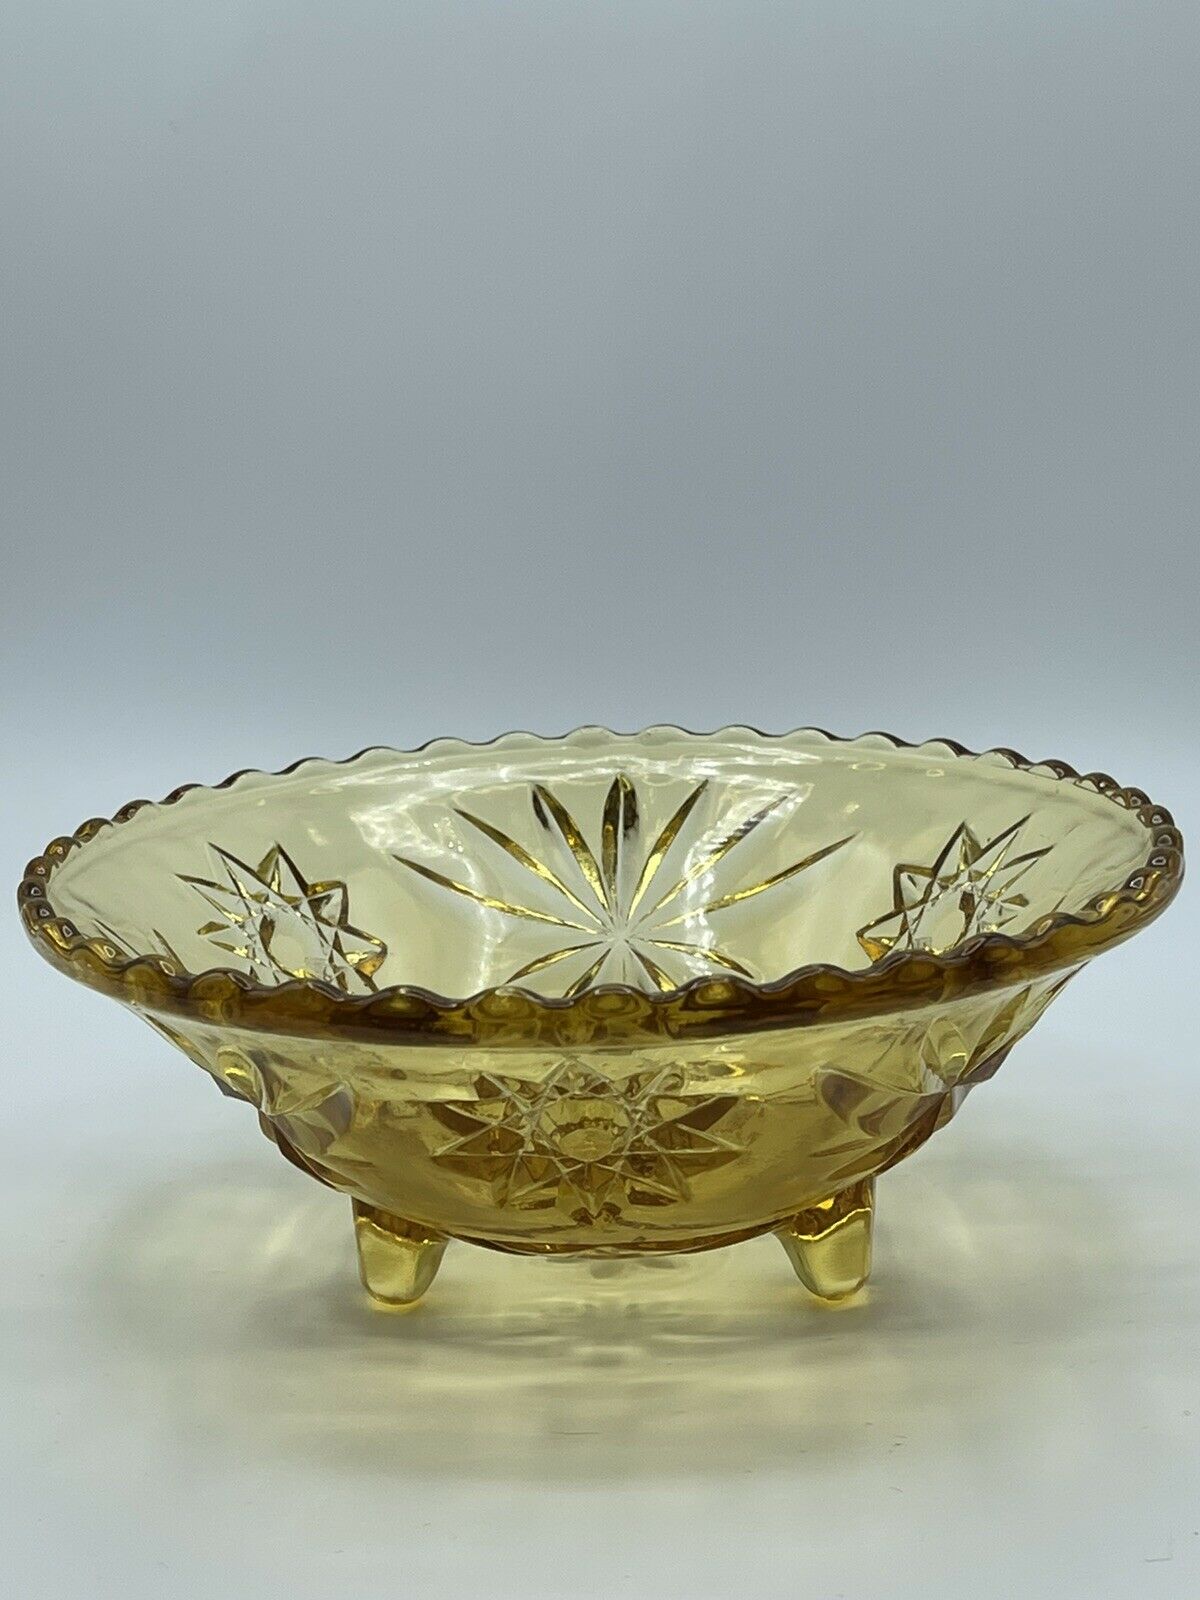 Amber Glass Candy Dish Bowl Anchor Hocking Footed 6 1/2"x2 1/2” Hobstar Fans